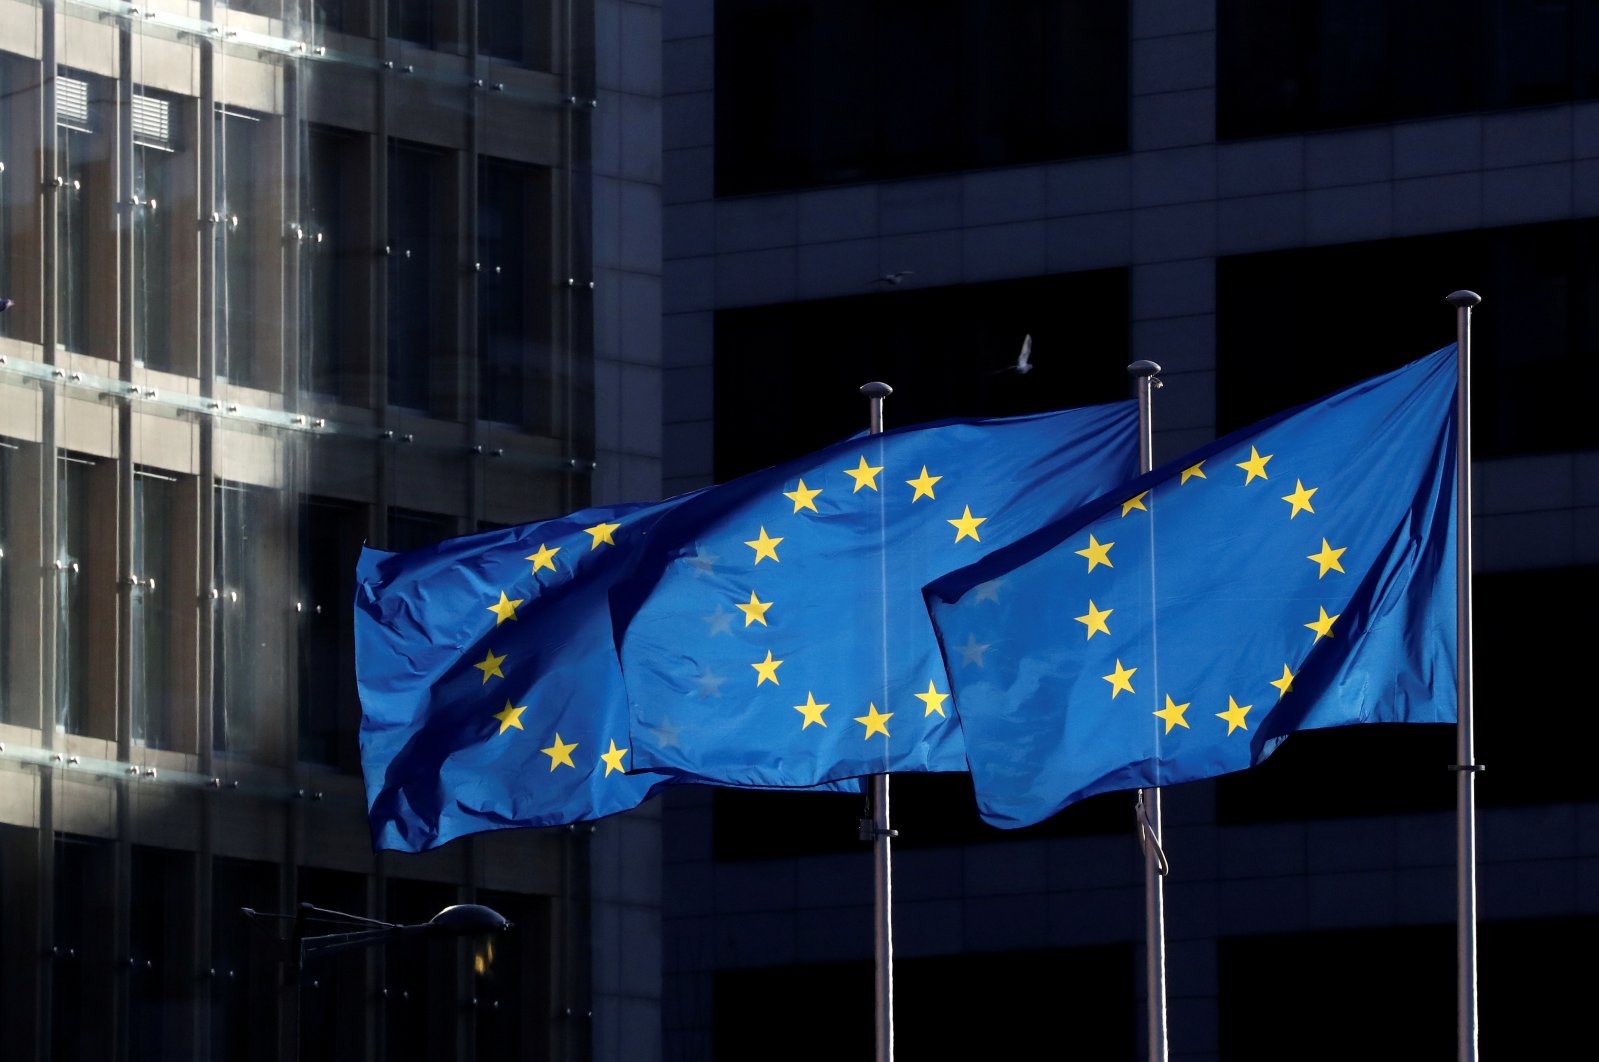 European Union flags fly outside the European Commission headquarters in Brussels, Belgium, Dec. 12, 2019. (Reuters Photo)